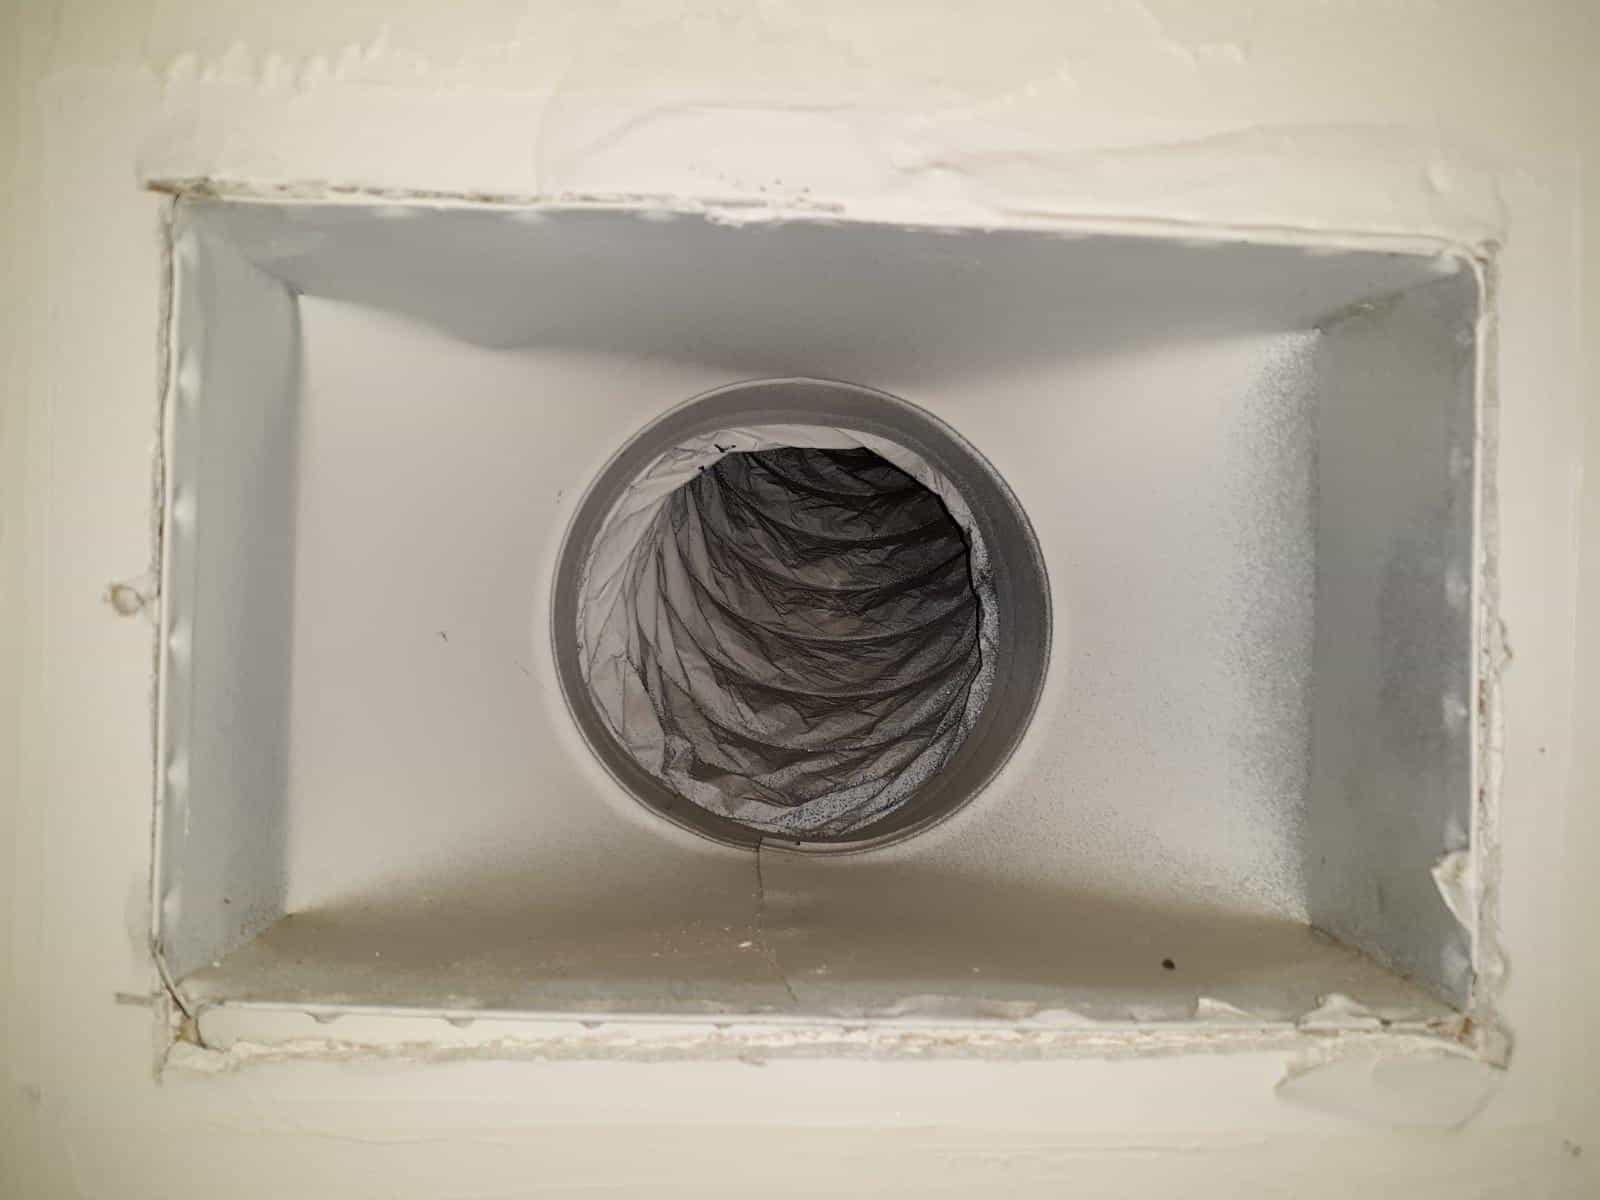 Dryer Vent Cleaning near me